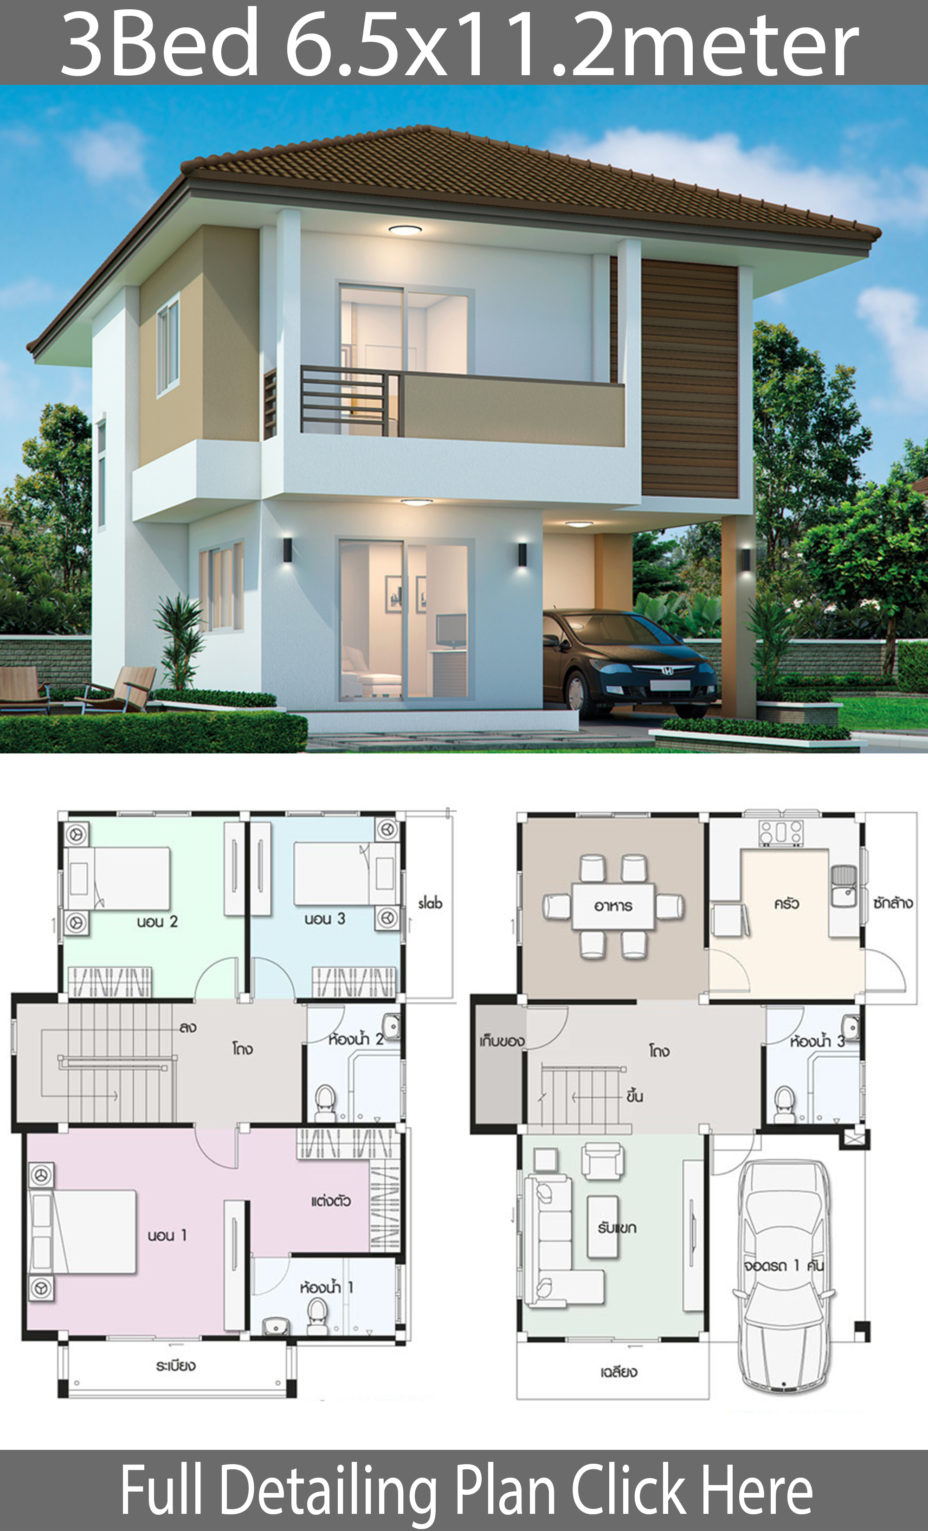 House design plan 6.5x11.2m with 3 bedrooms - House Plans 3D